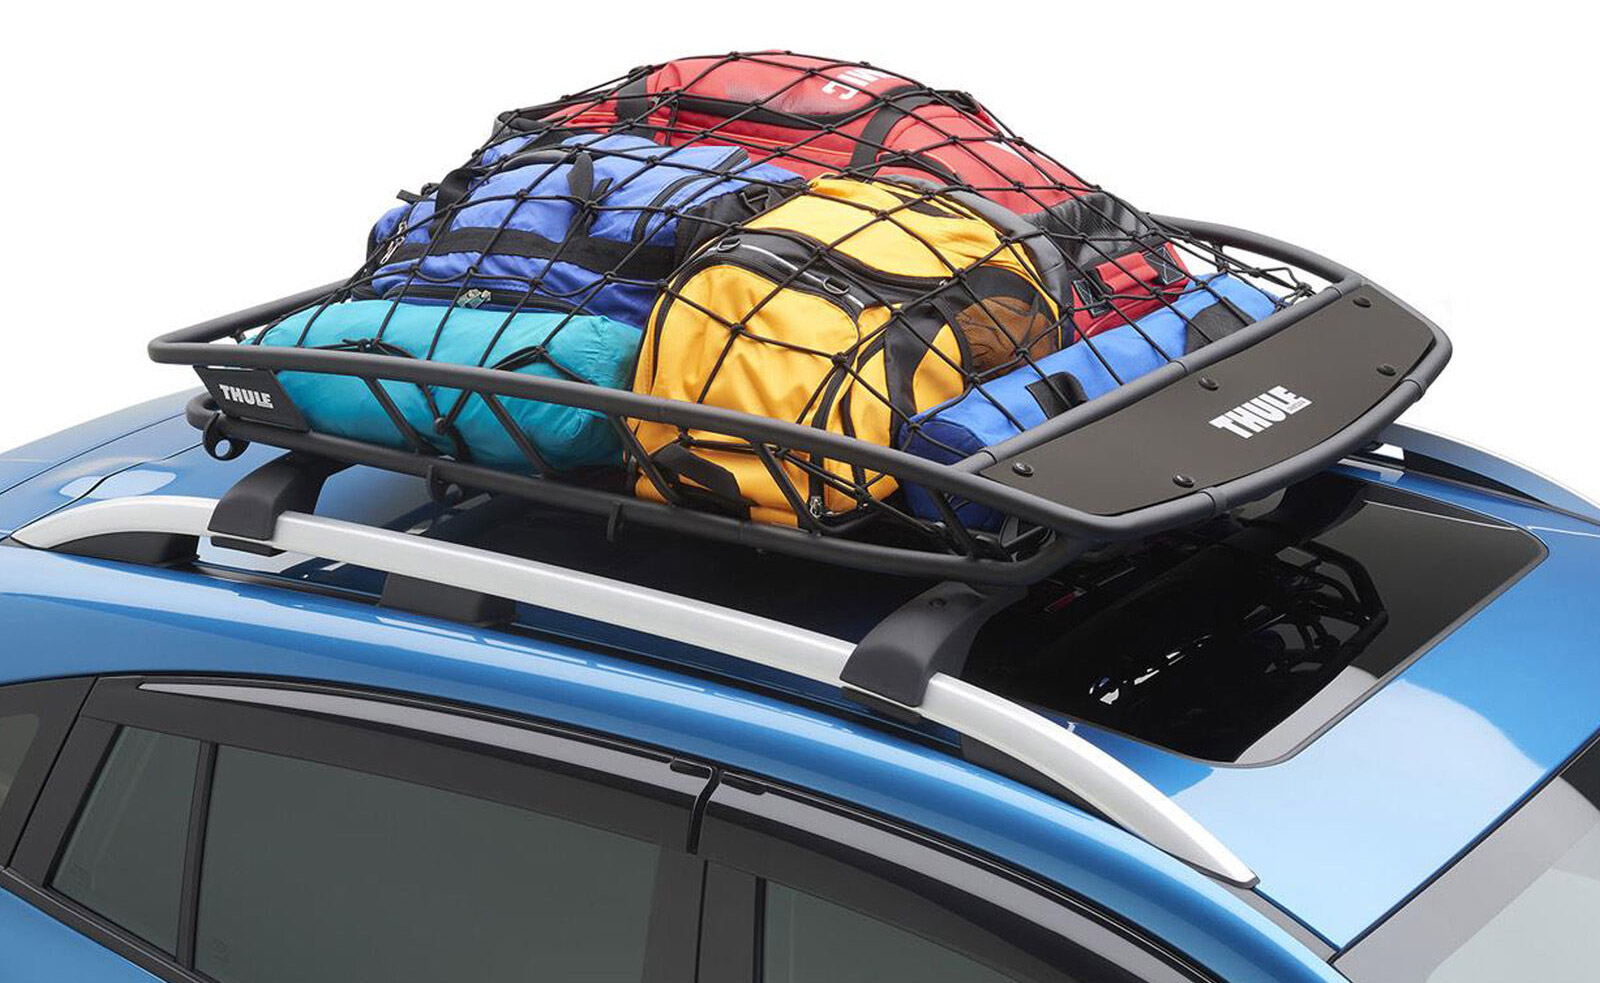 Types of Roof Racks: Baskets, Platforms and Accessories 